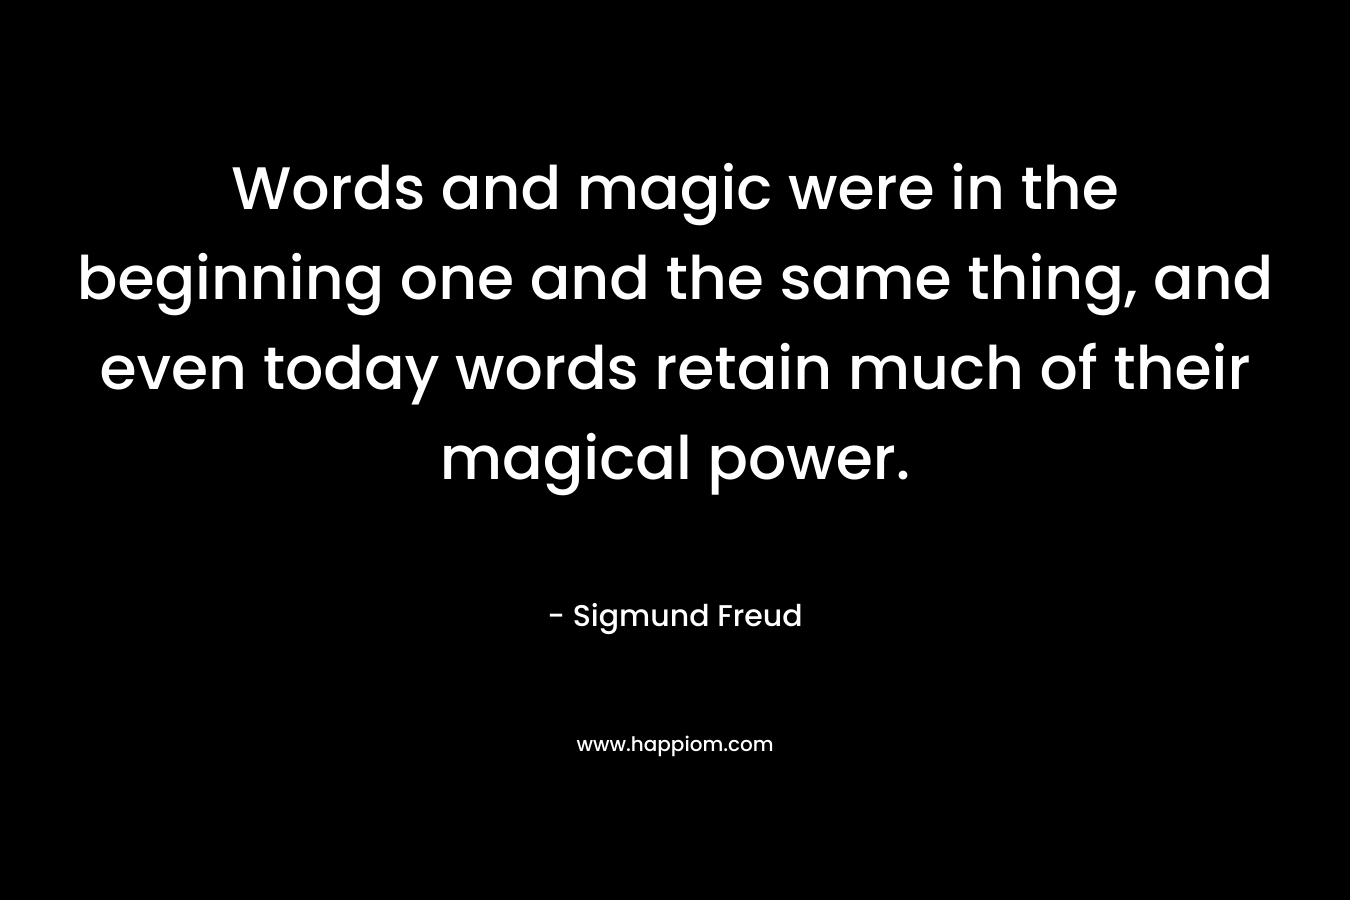 Words and magic were in the beginning one and the same thing, and even today words retain much of their magical power.